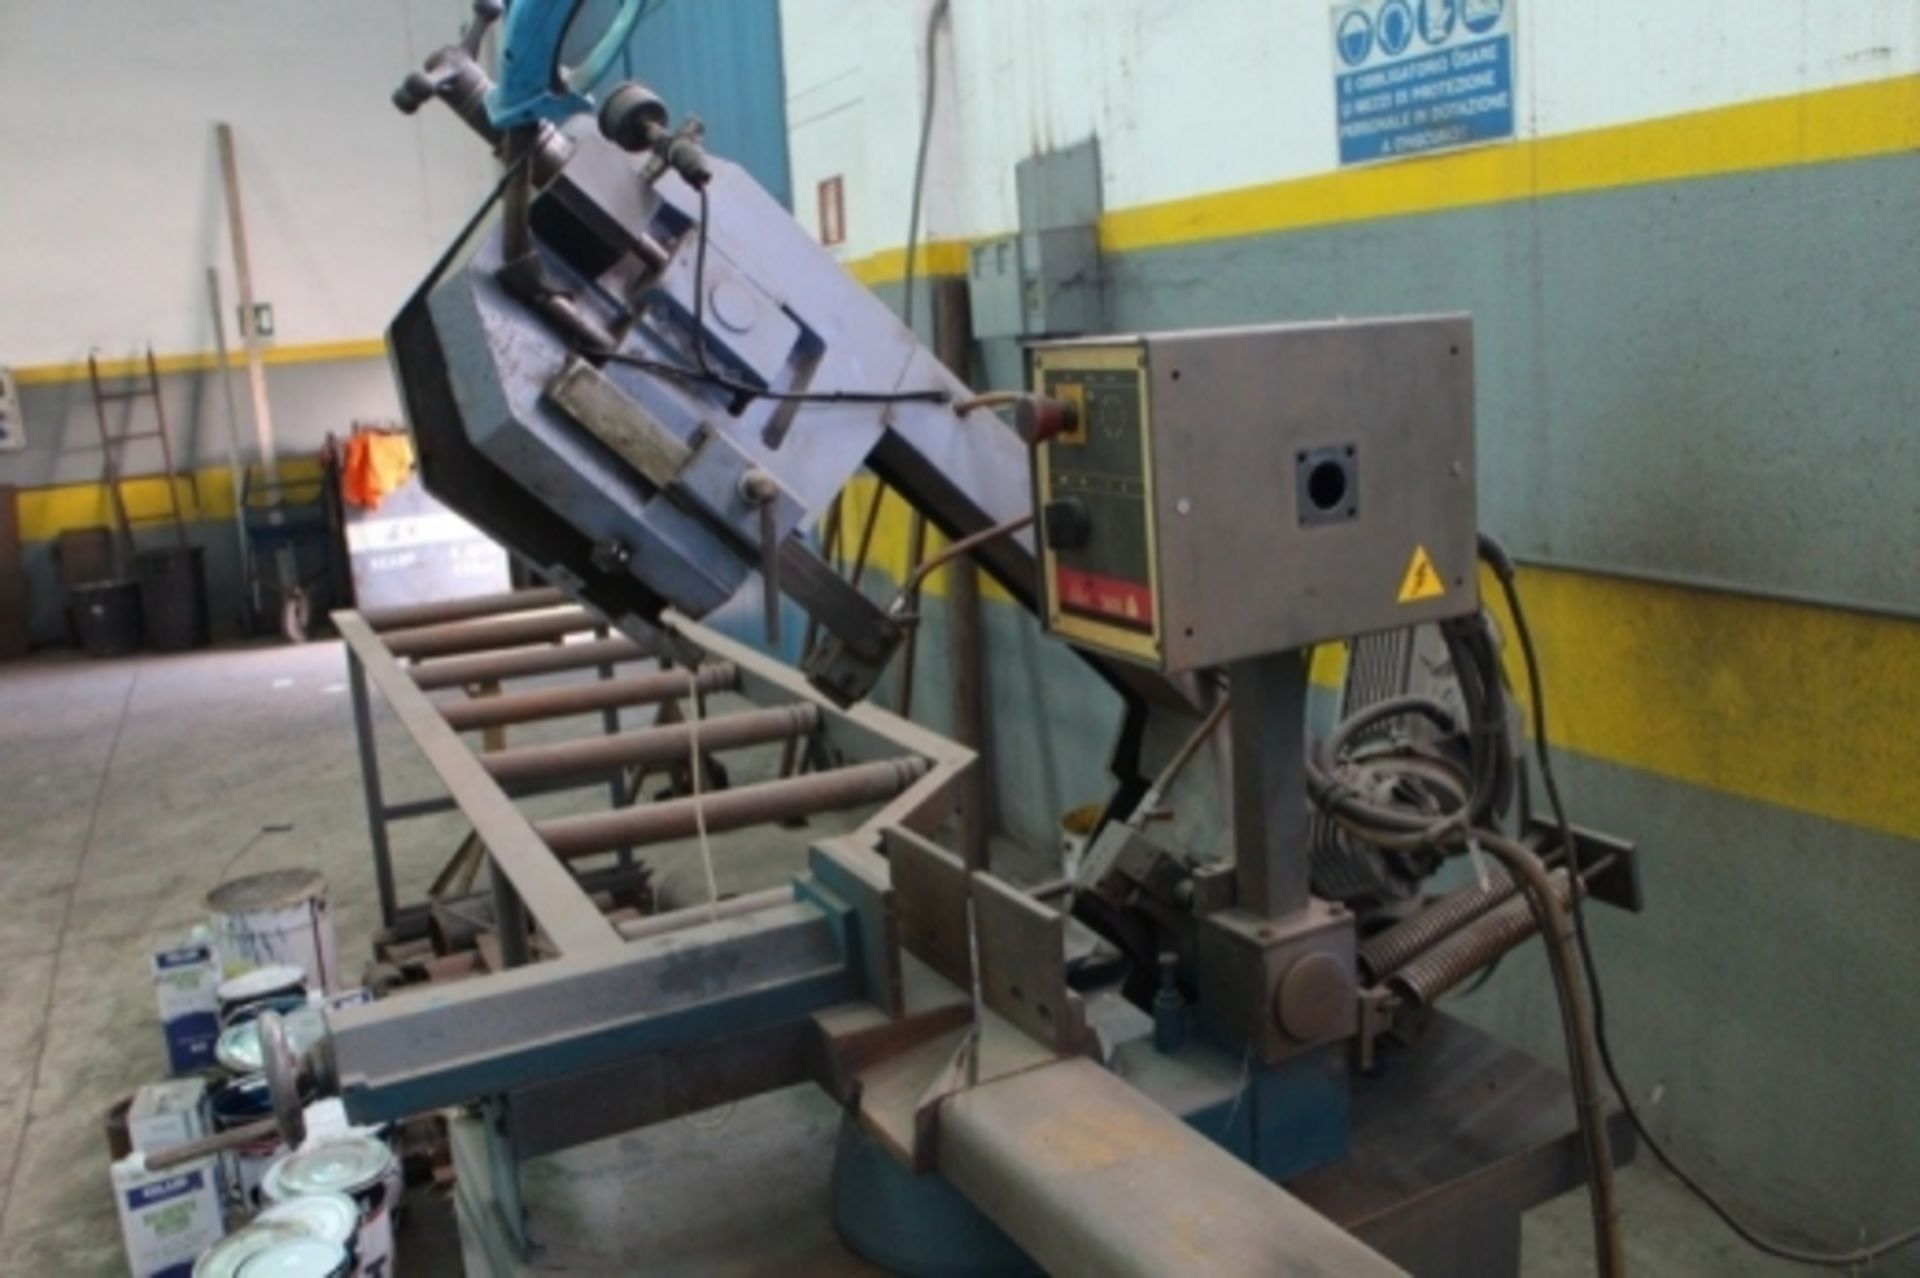 1,BAND SAW BRAND MEP, MOD. SHARK260,YEAR 2000, SERIAL N. 117916187, COMPLETE ROLLER Click here for - Image 4 of 4